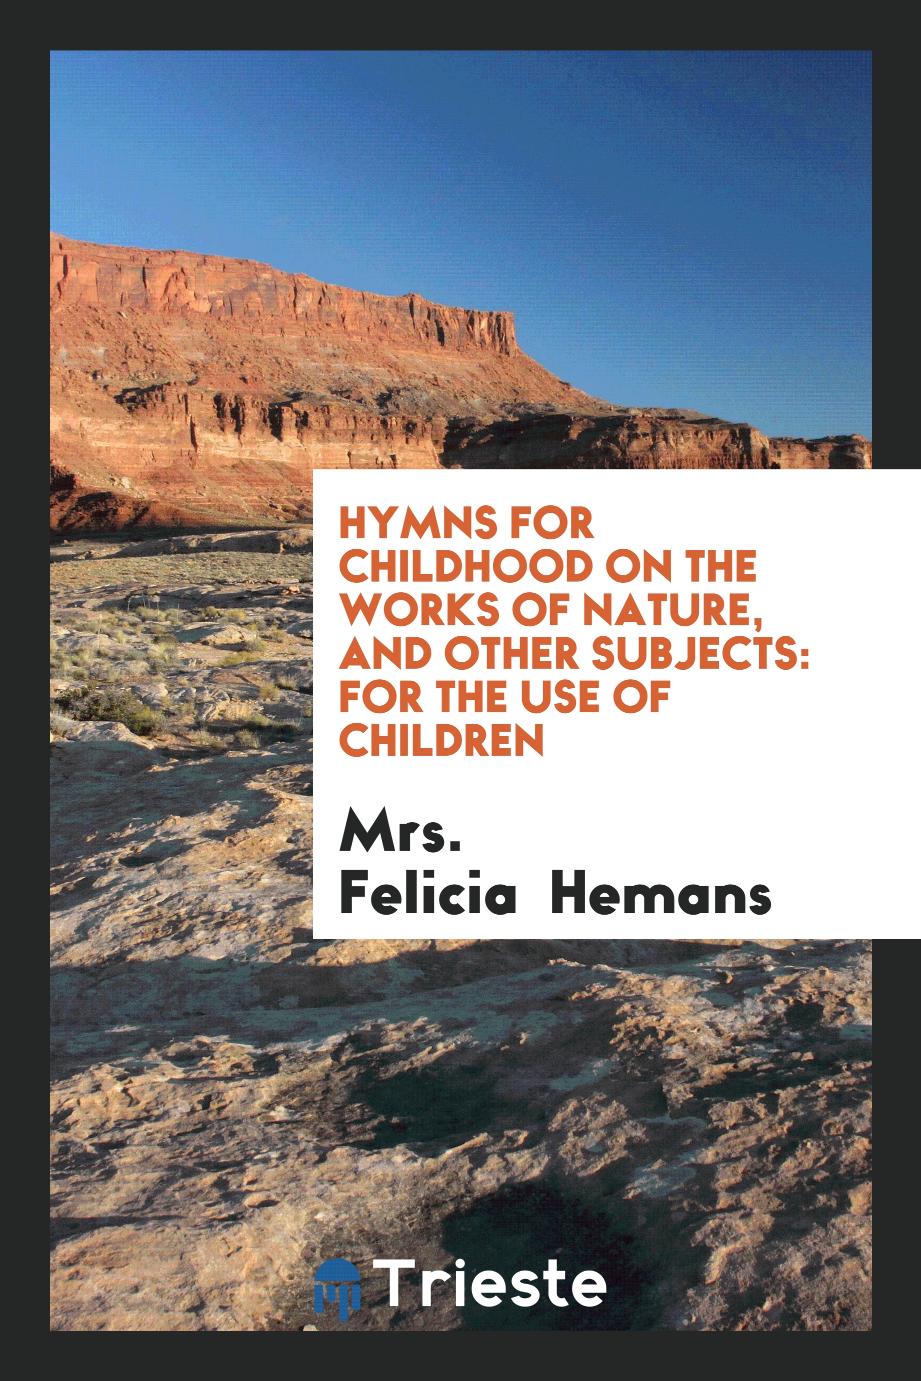 Hymns for childhood on the works of nature, and other subjects: for the use of children